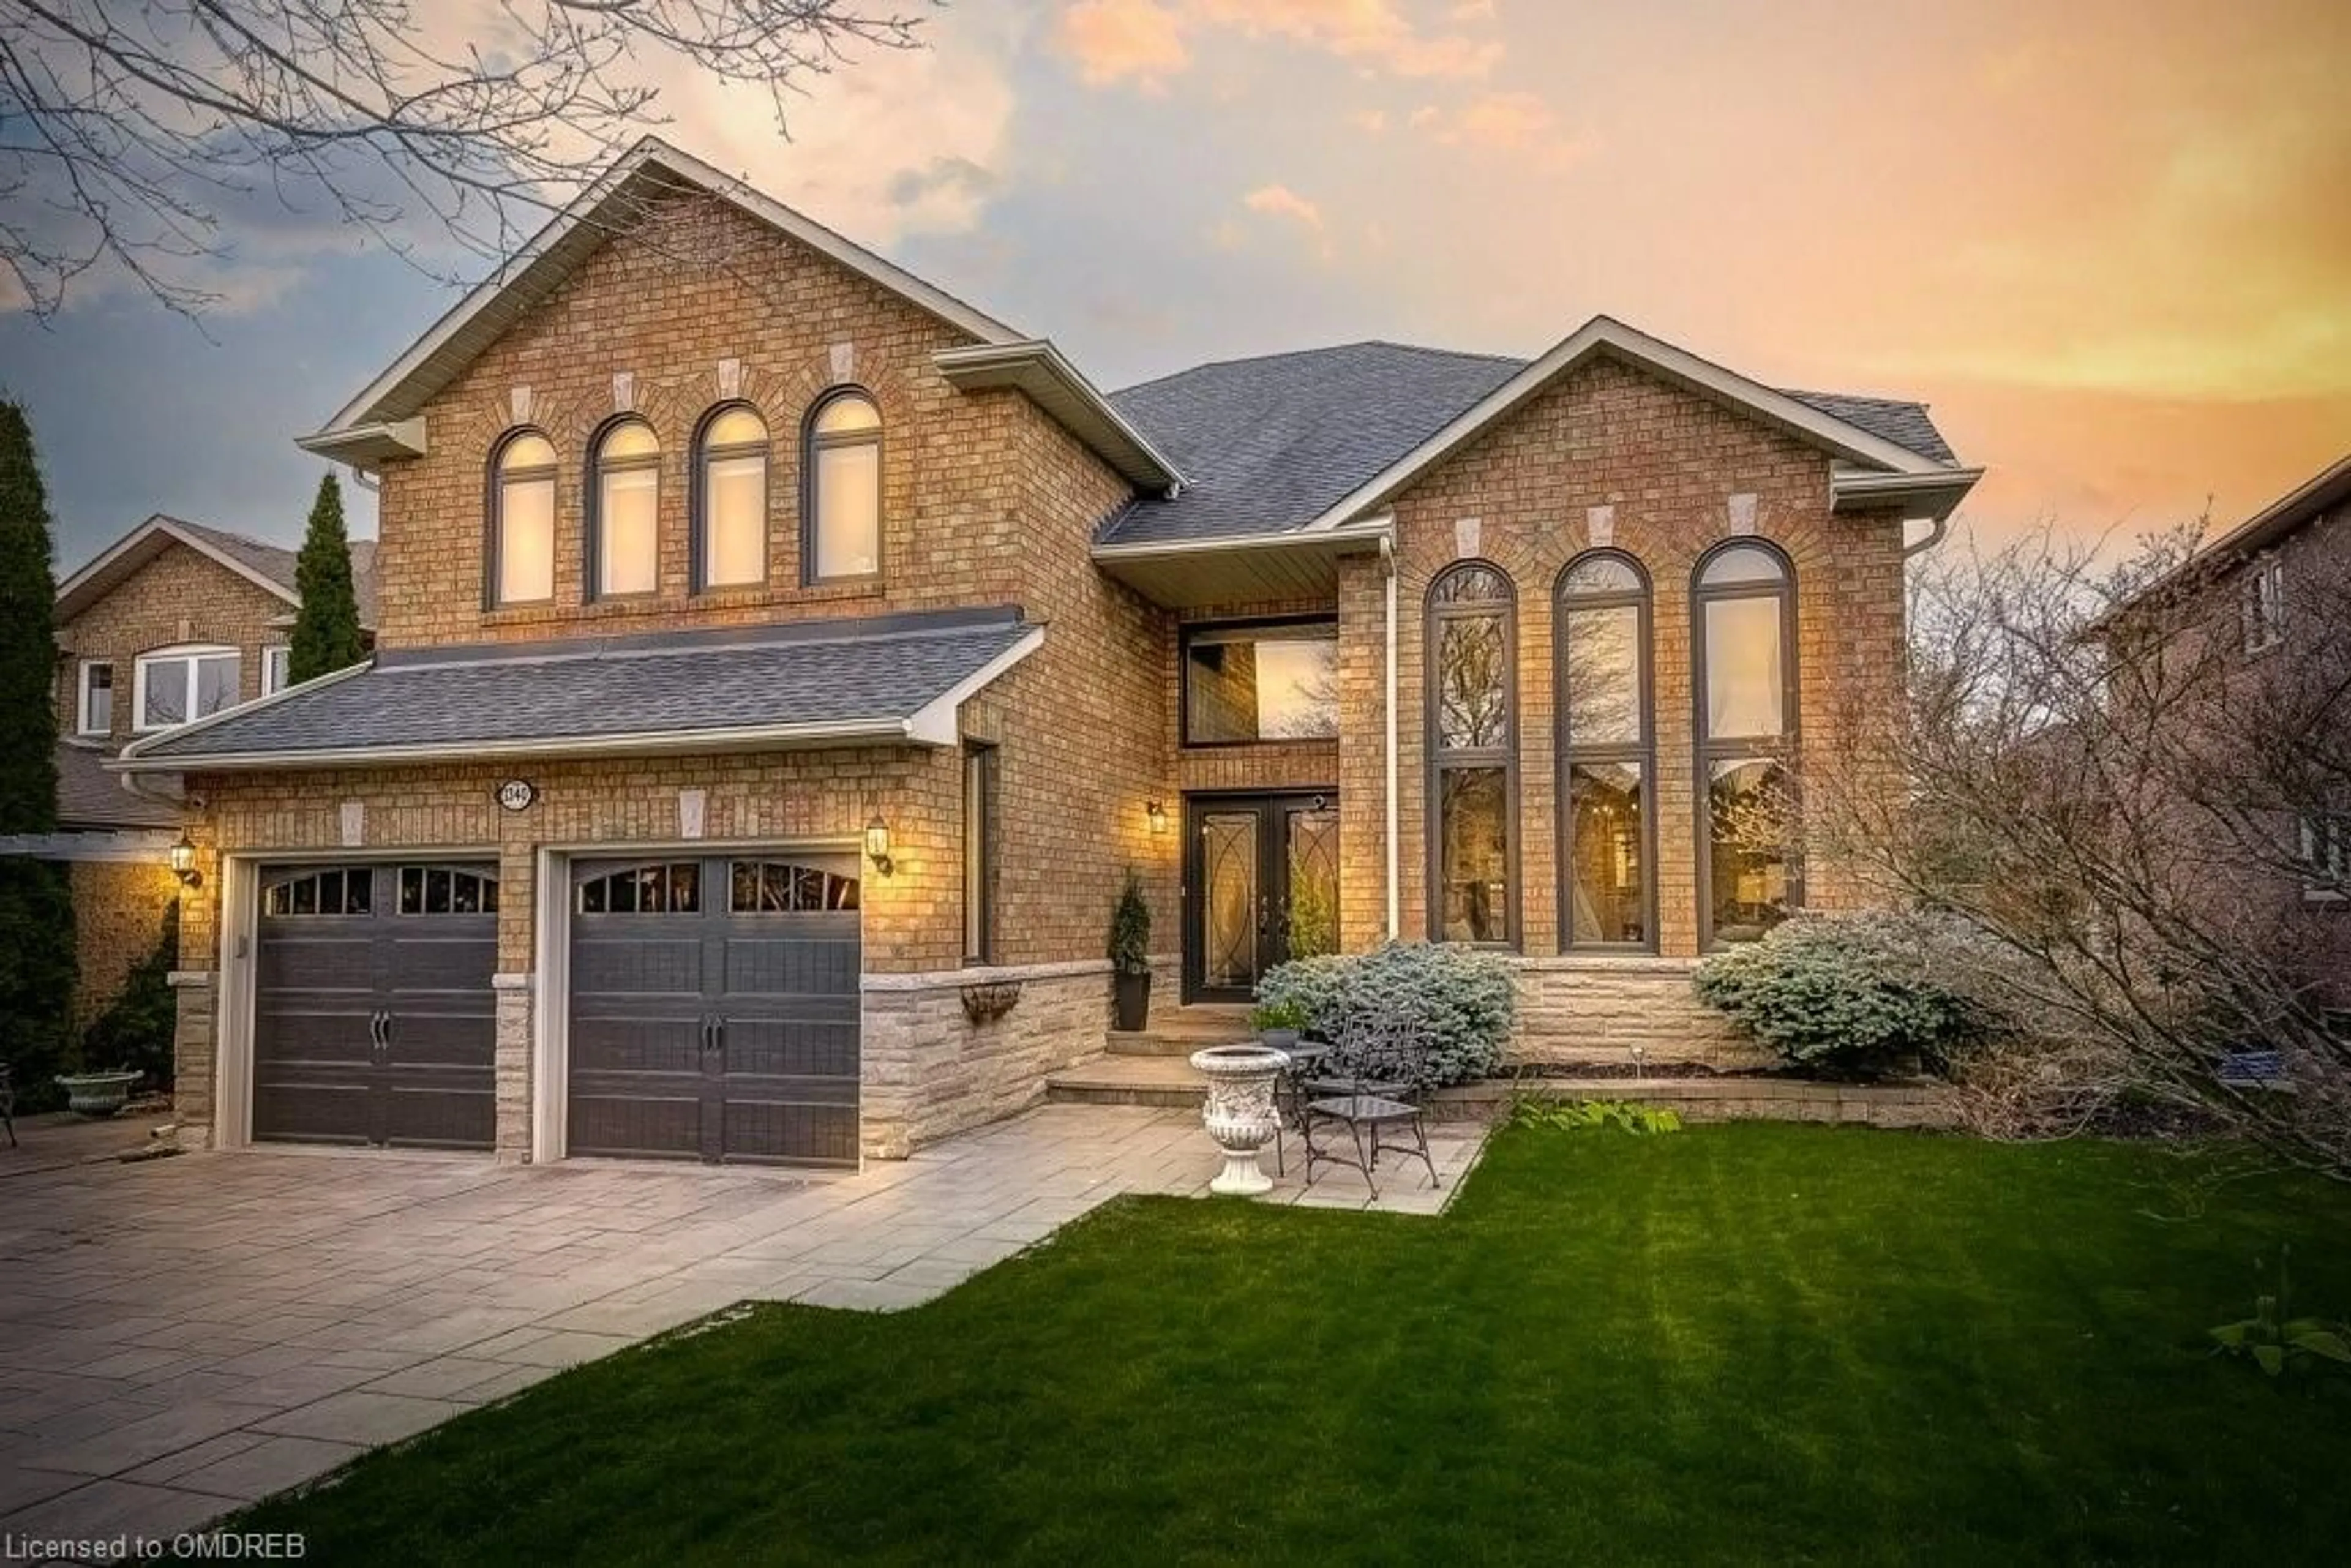 Home with brick exterior material for 1340 Tinsmith Lane, Oakville Ontario L6M 3C8